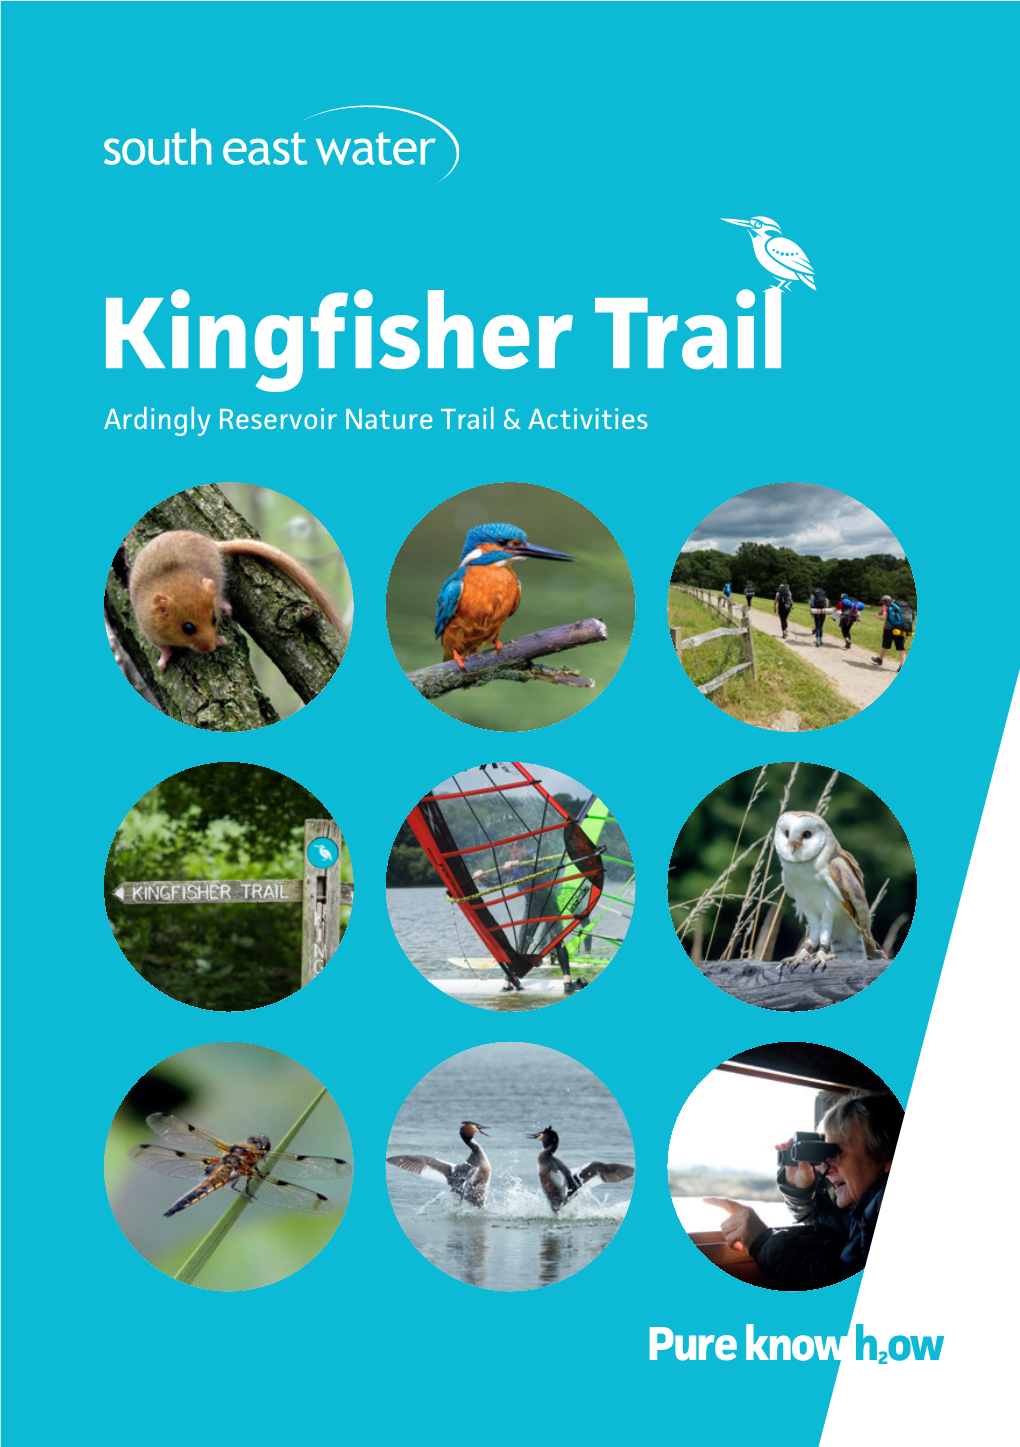 Kingfisher Trail Ardingly Reservoir Nature Trail & Activities Welcome to Ardingly Reservoir Local Nature Reserve and Kingfisher Trail